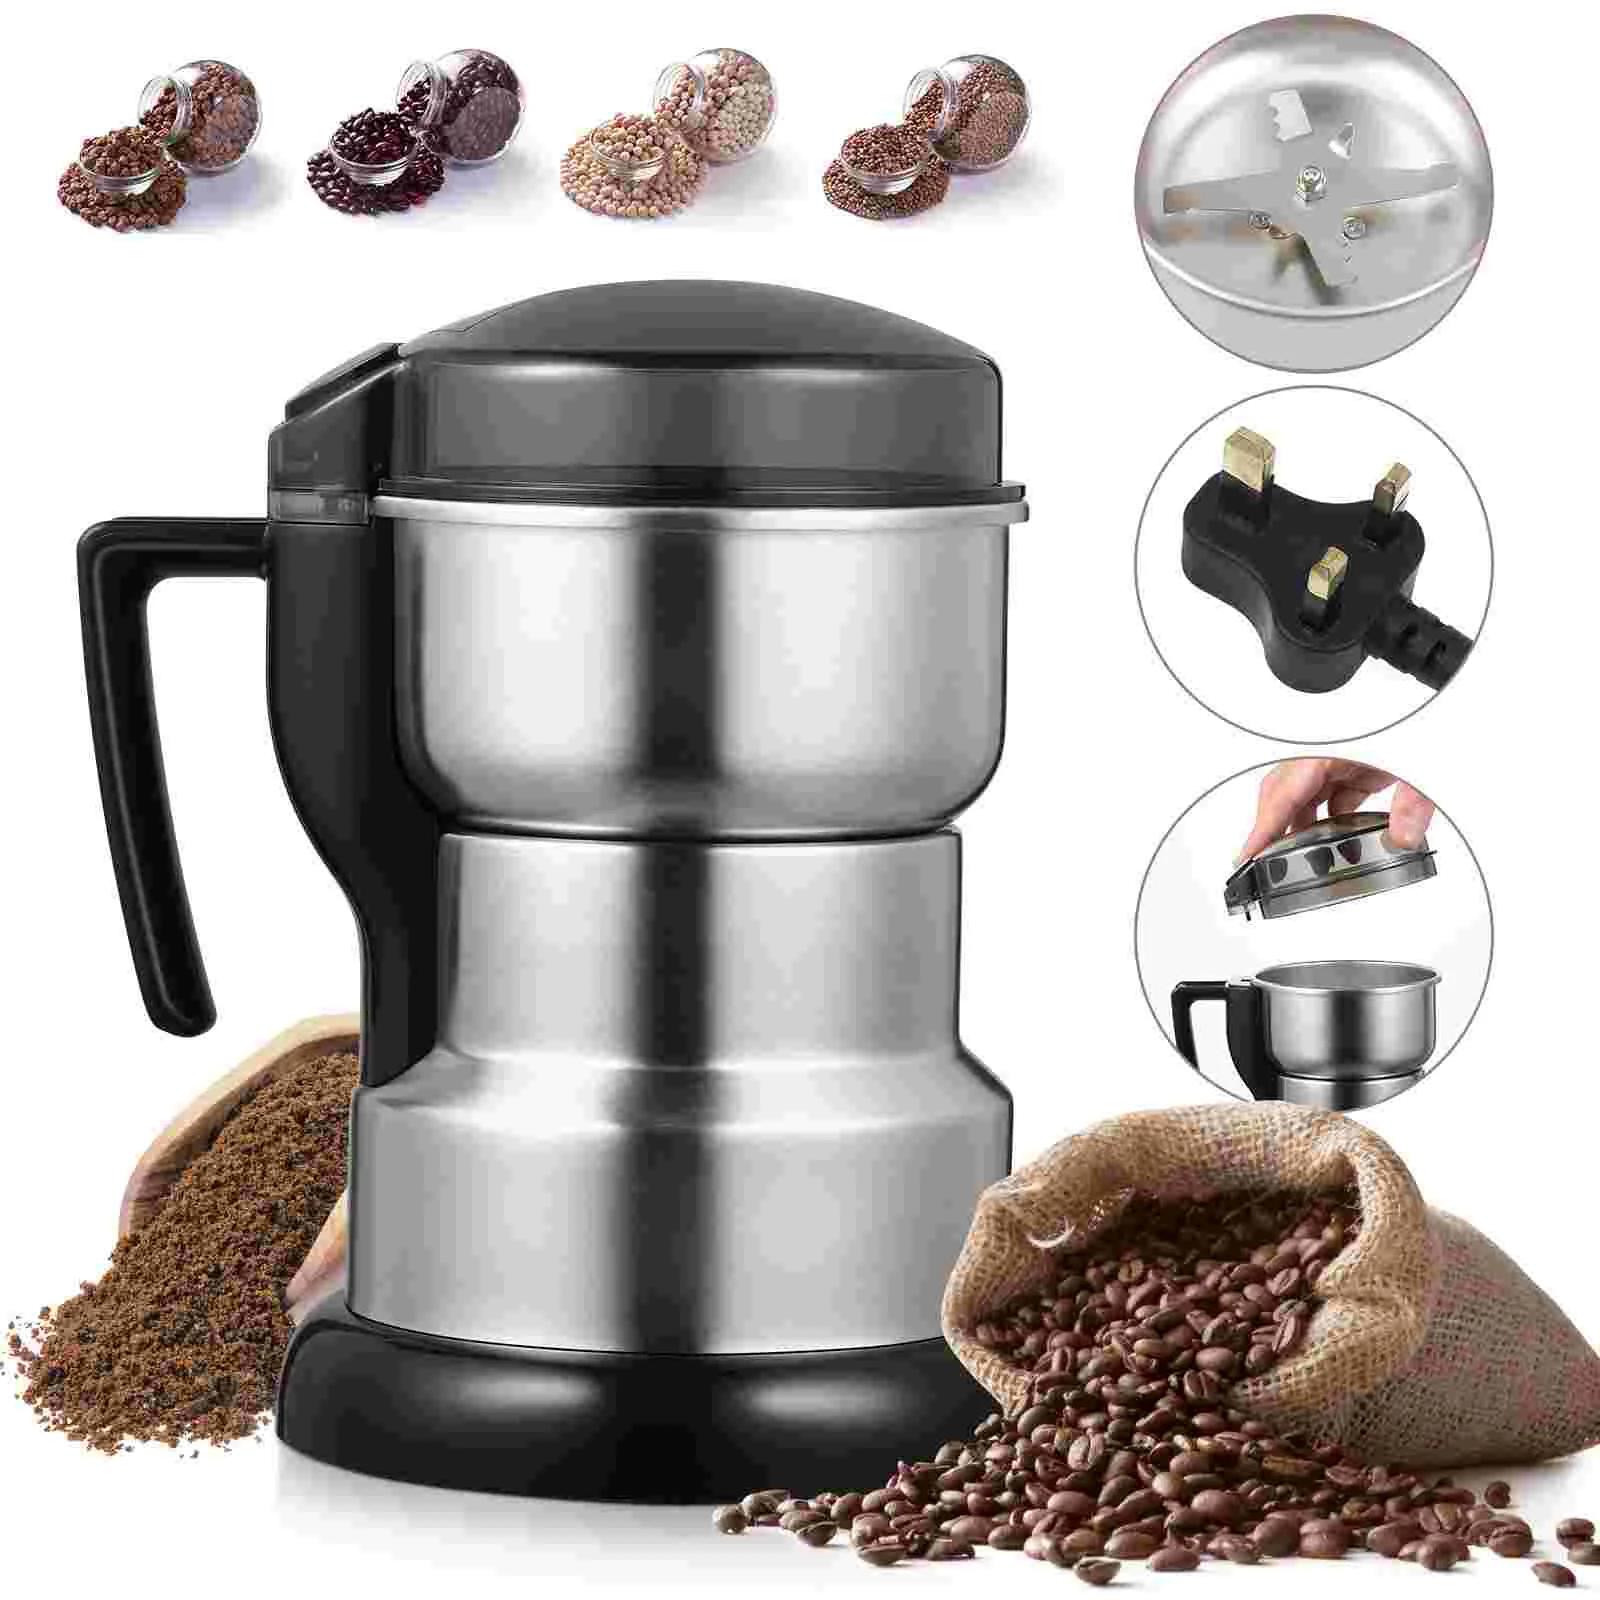 

Grinder Electric Coffee Bean Machine Kitchen Beans Grinders Small Grinding Blender Stainless Steel Espresso Machines Home